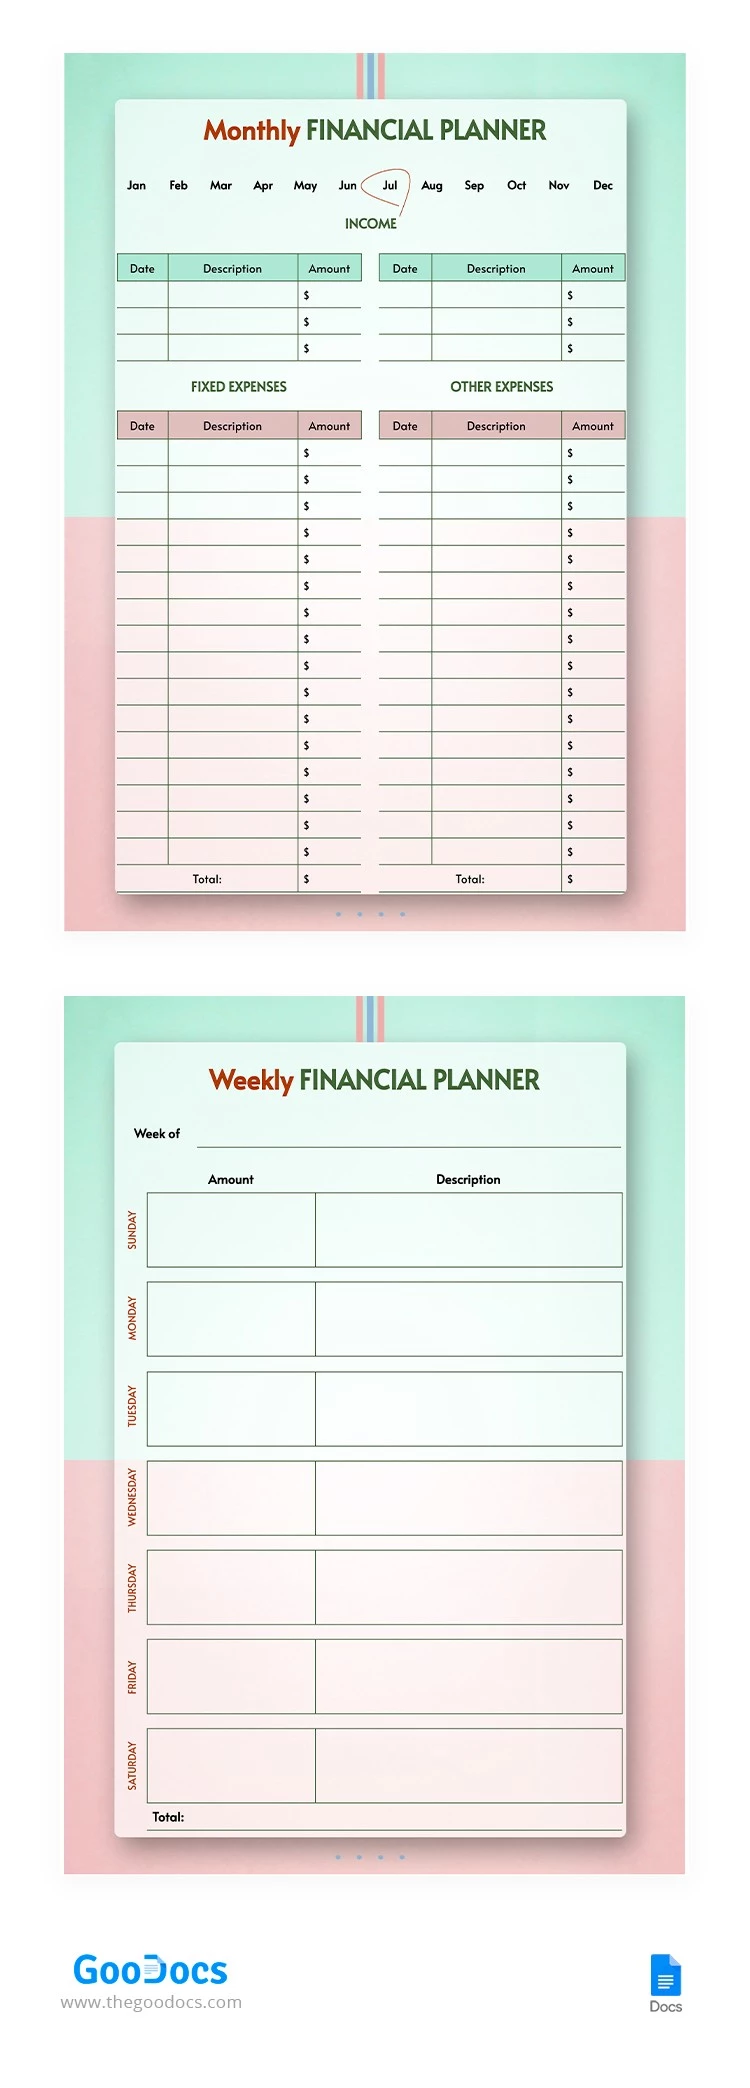 Monthly & Weekly Financial Planner - free Google Docs Template - 10064832